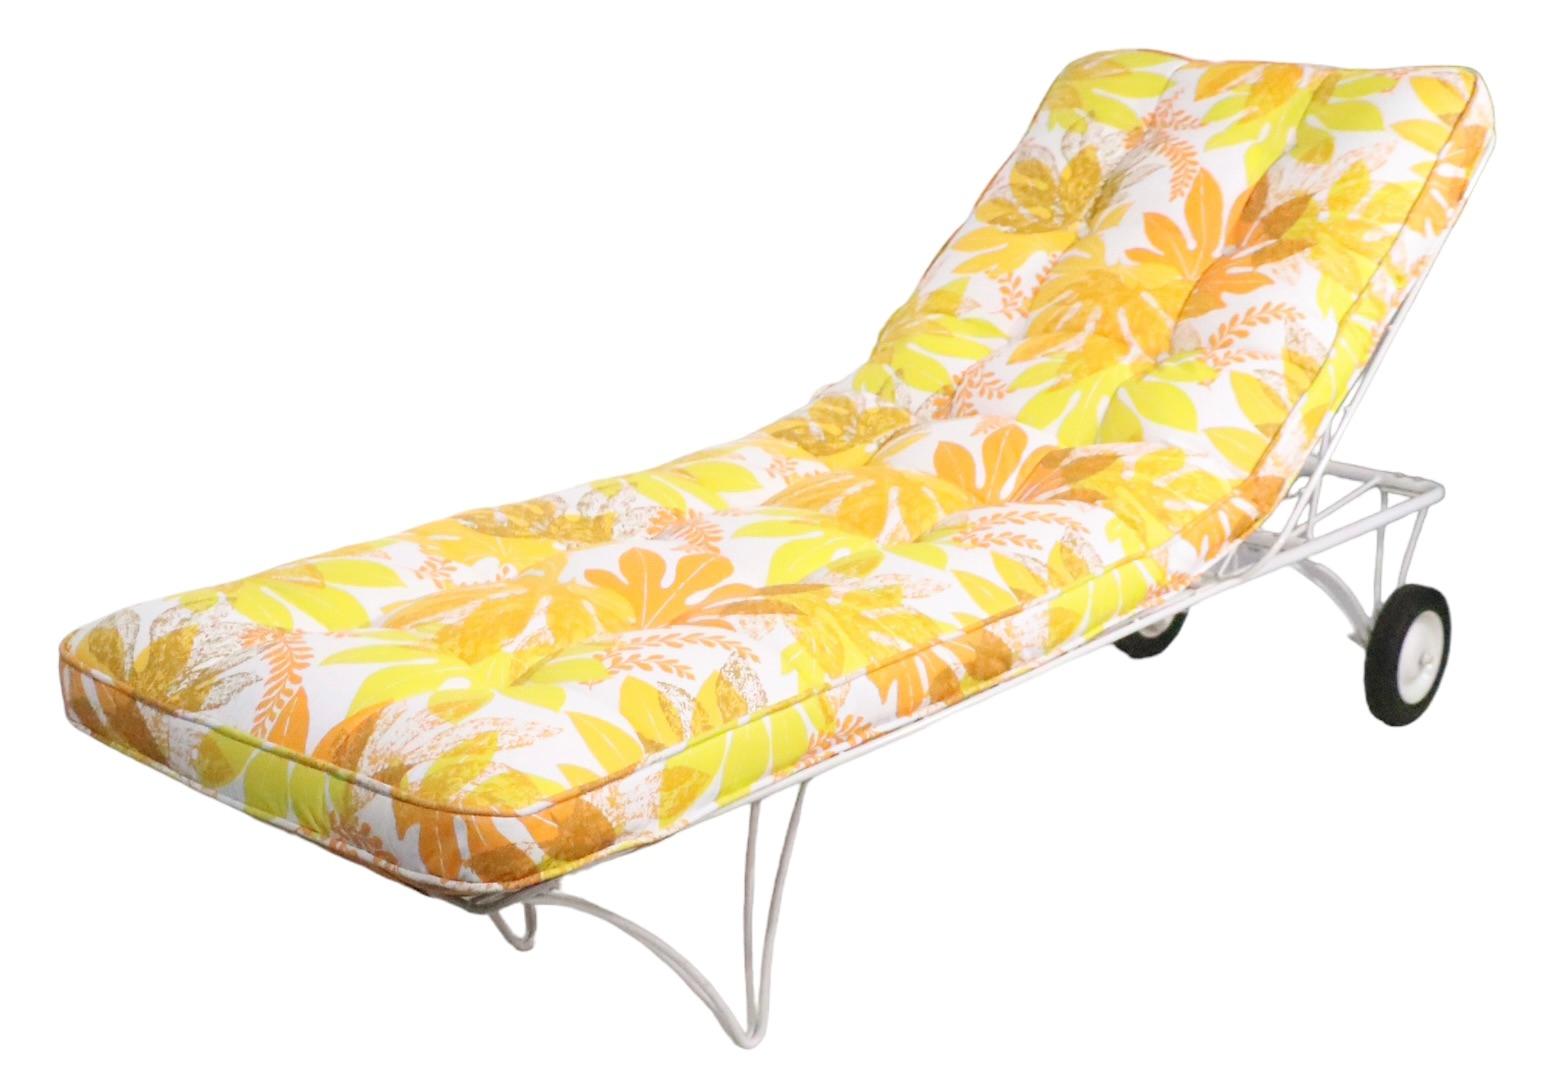 20th Century Reclining Daybed Poolside Garden Patio Chaise Lounge by Homecrest C 1950/1960s